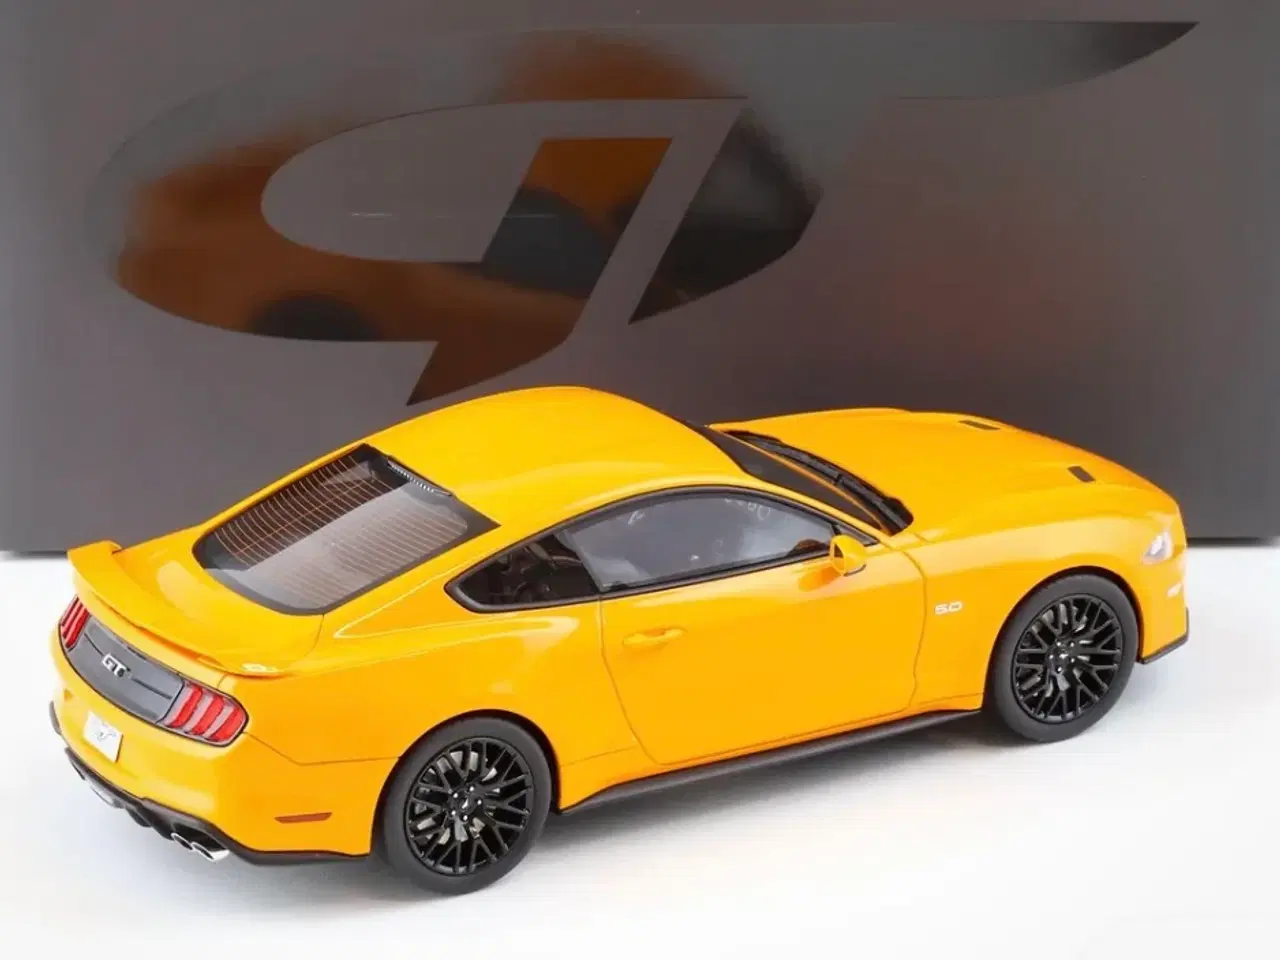 Billede 3 - 1:18 Ford Mustang GT Coupe 2019